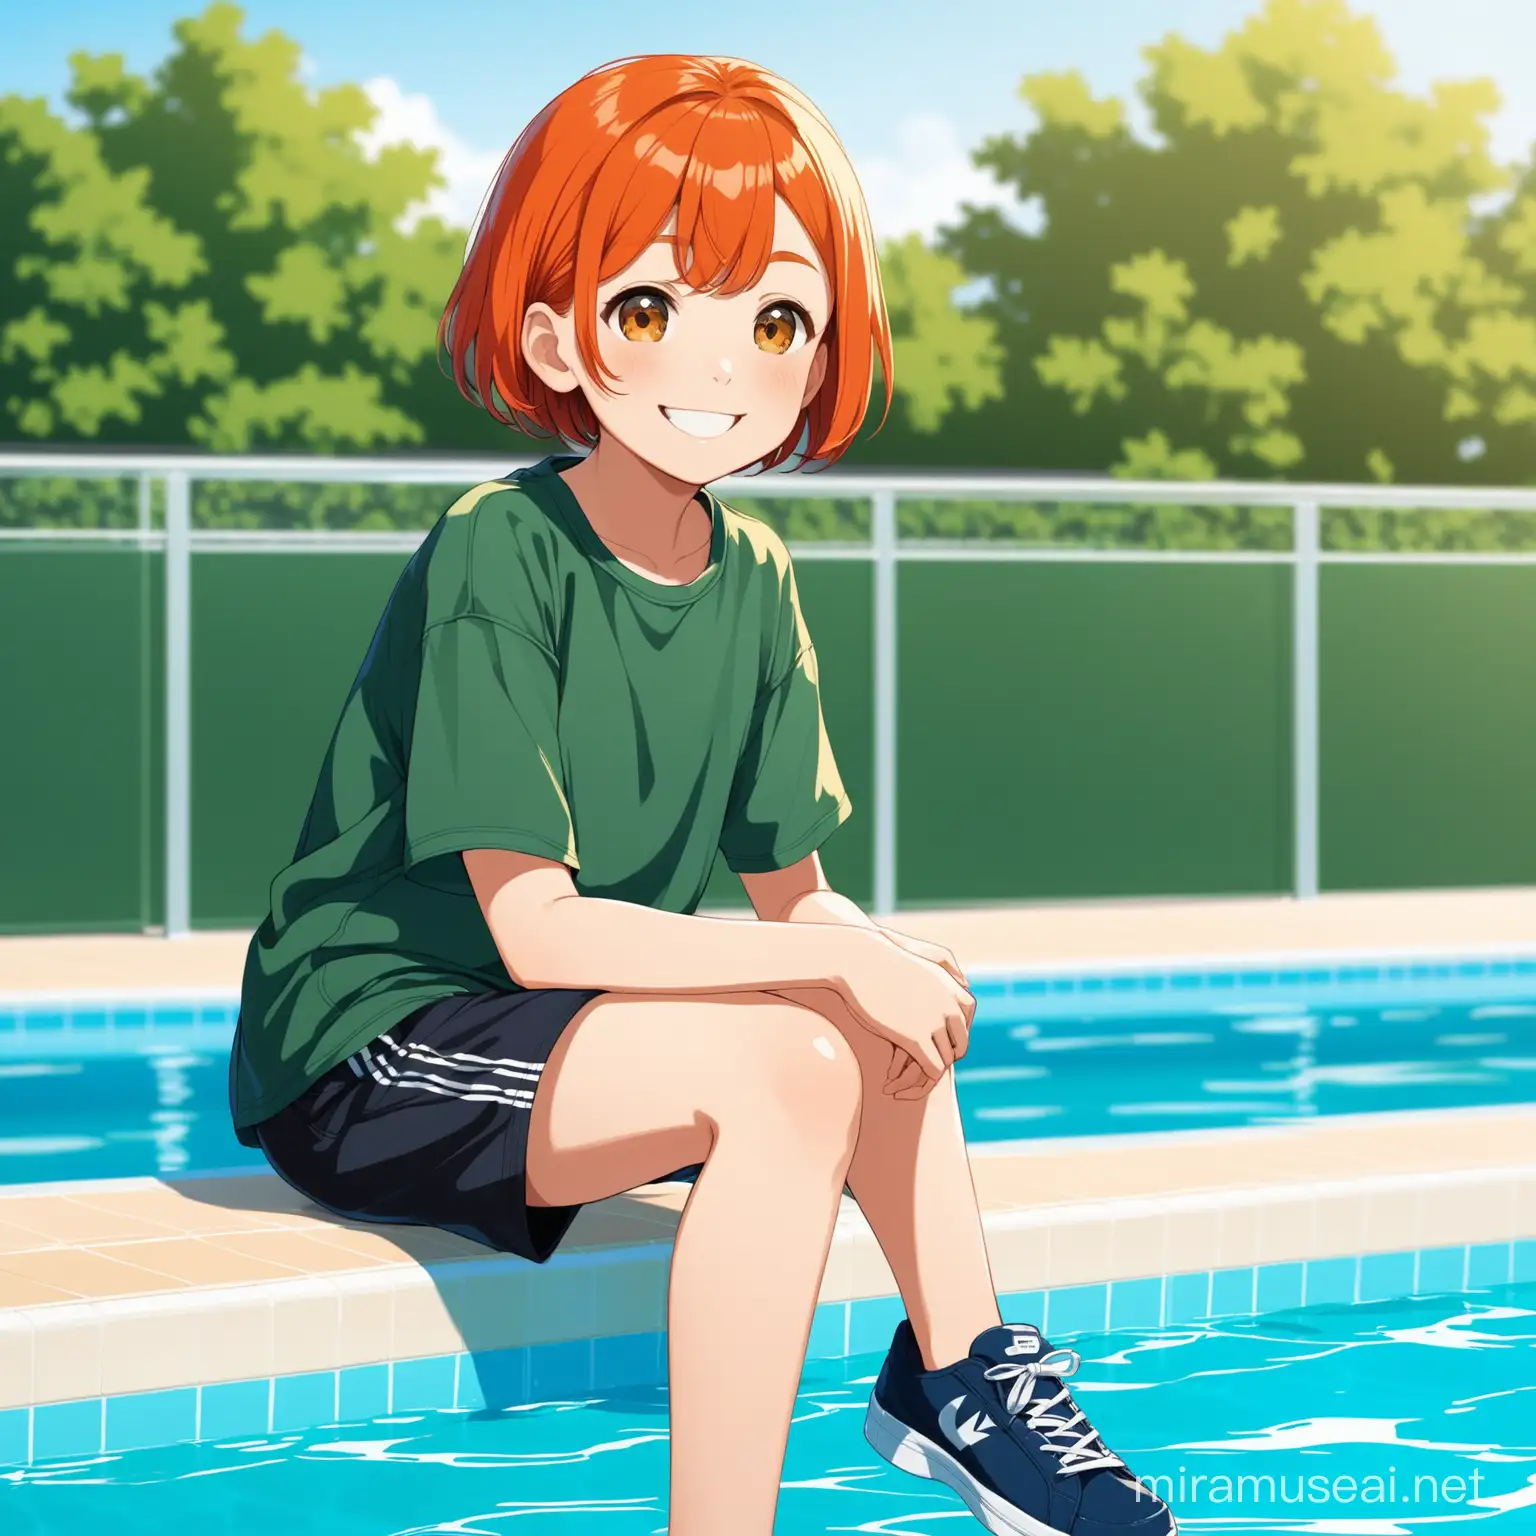 Smiling 11YearOld Girl with Orange Red Hair by the Swimming Pool